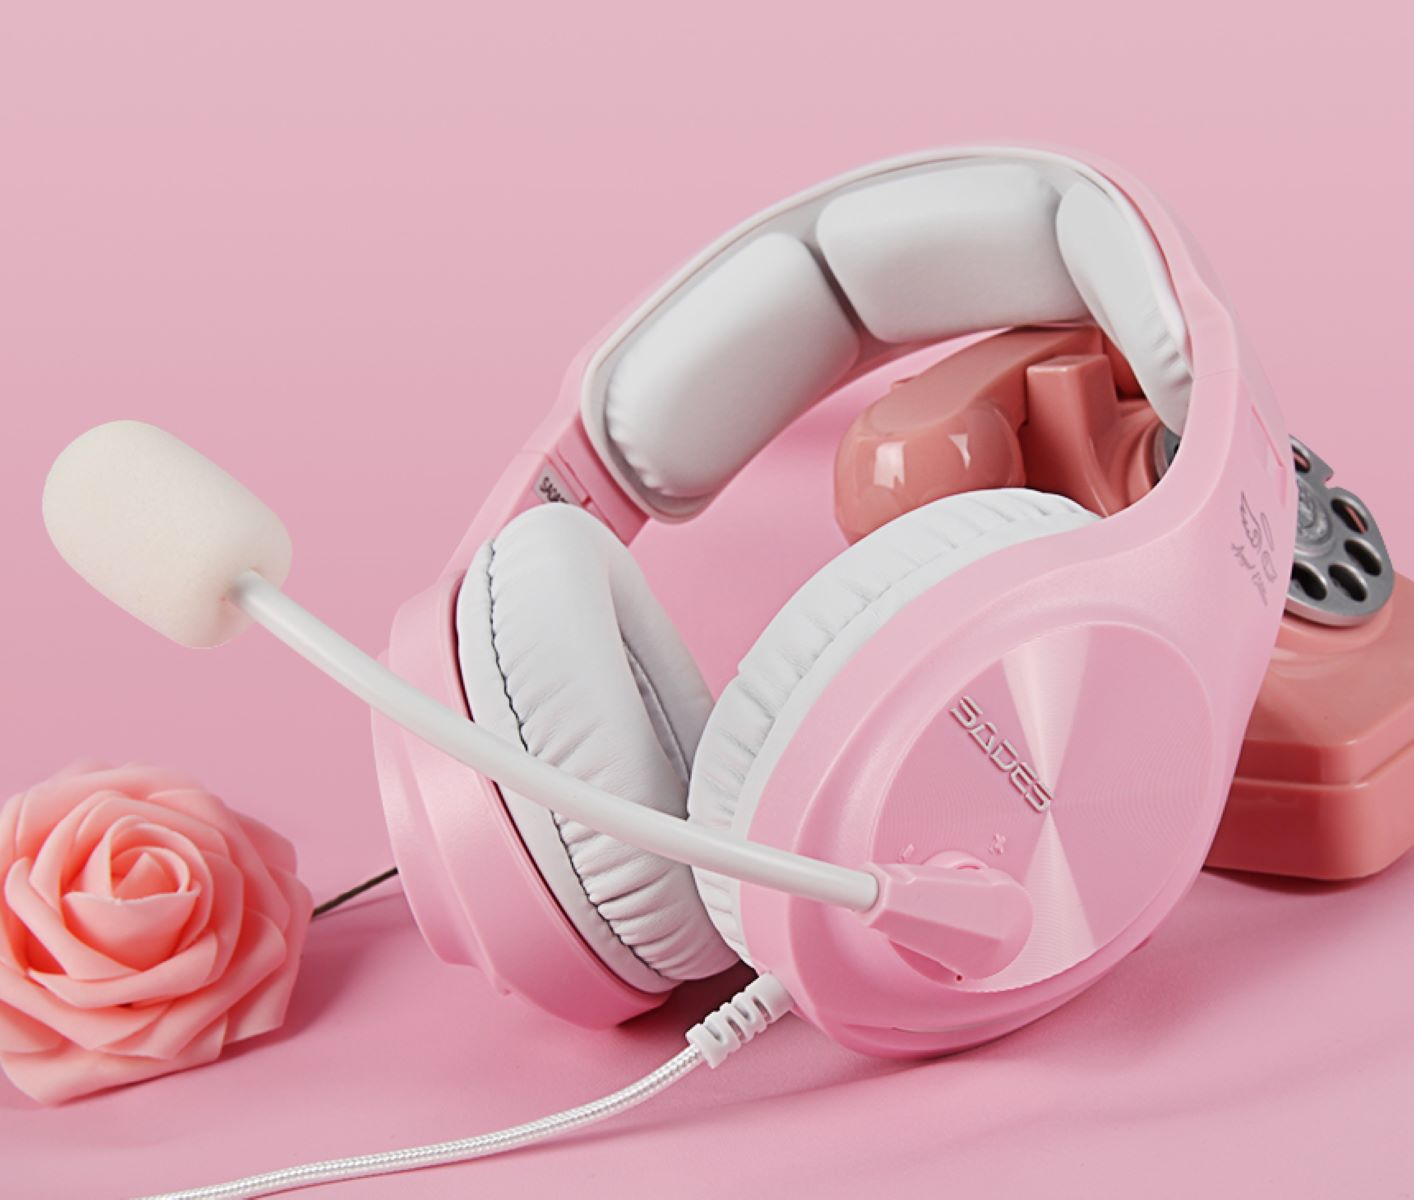 SADES A2, Over-ear Gaming-Headset pink/weiß